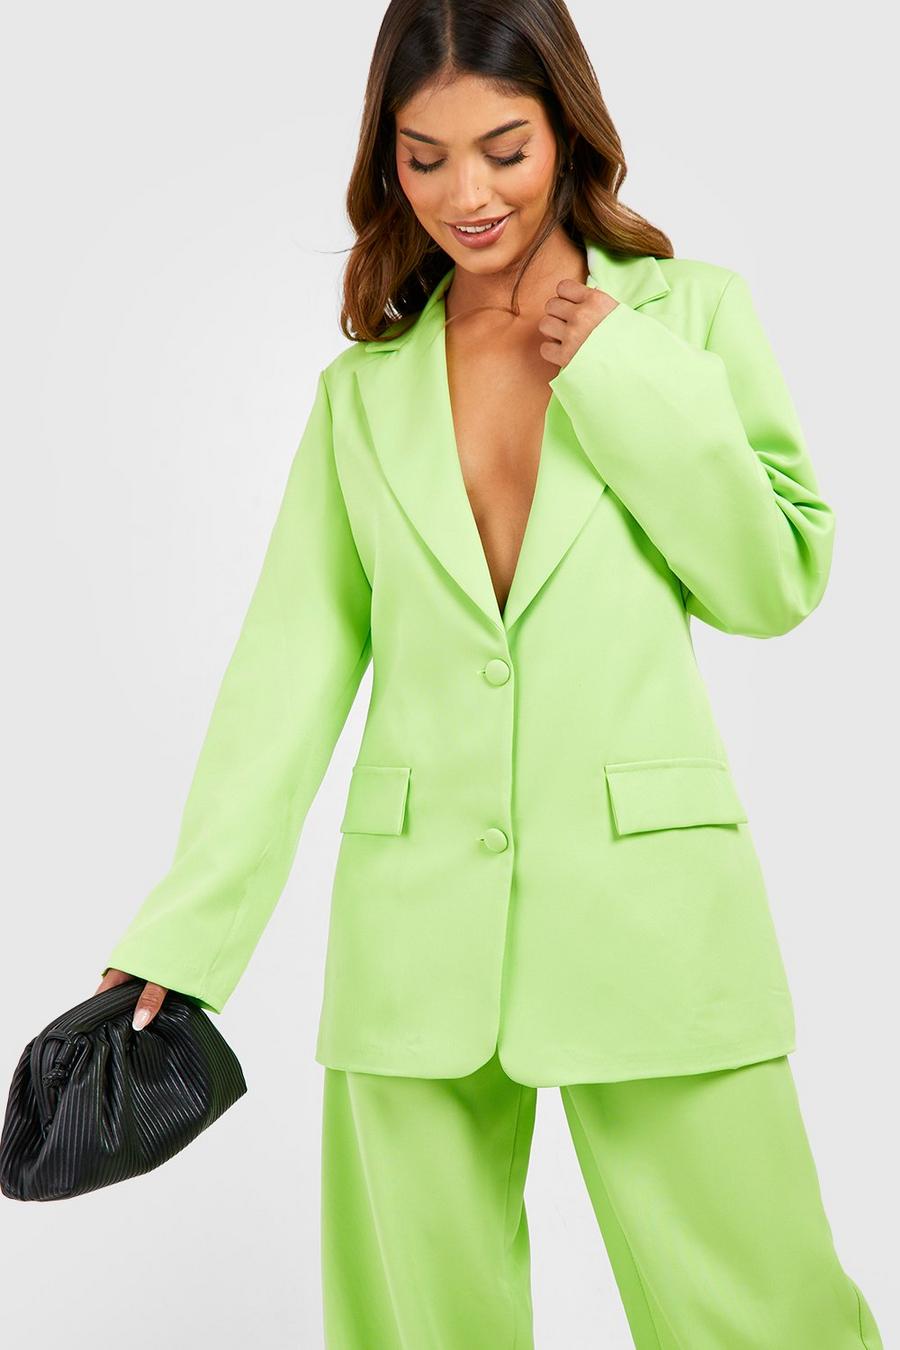 Limeade yellow Oversized Relaxed Fit Tailored Blazer